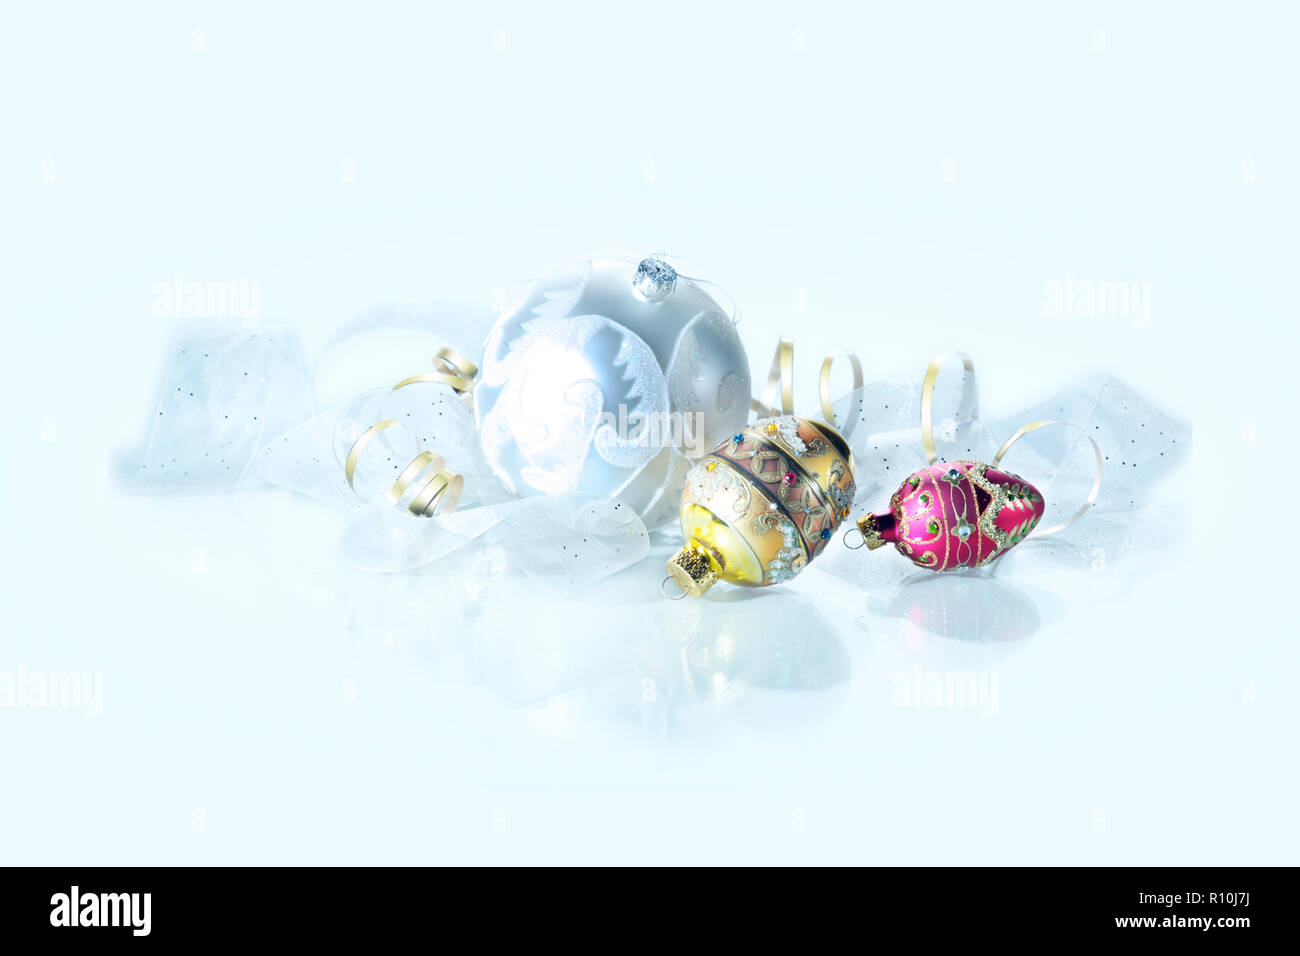 Ornate Christmas baubles and ribbon on white surface Stock Photo